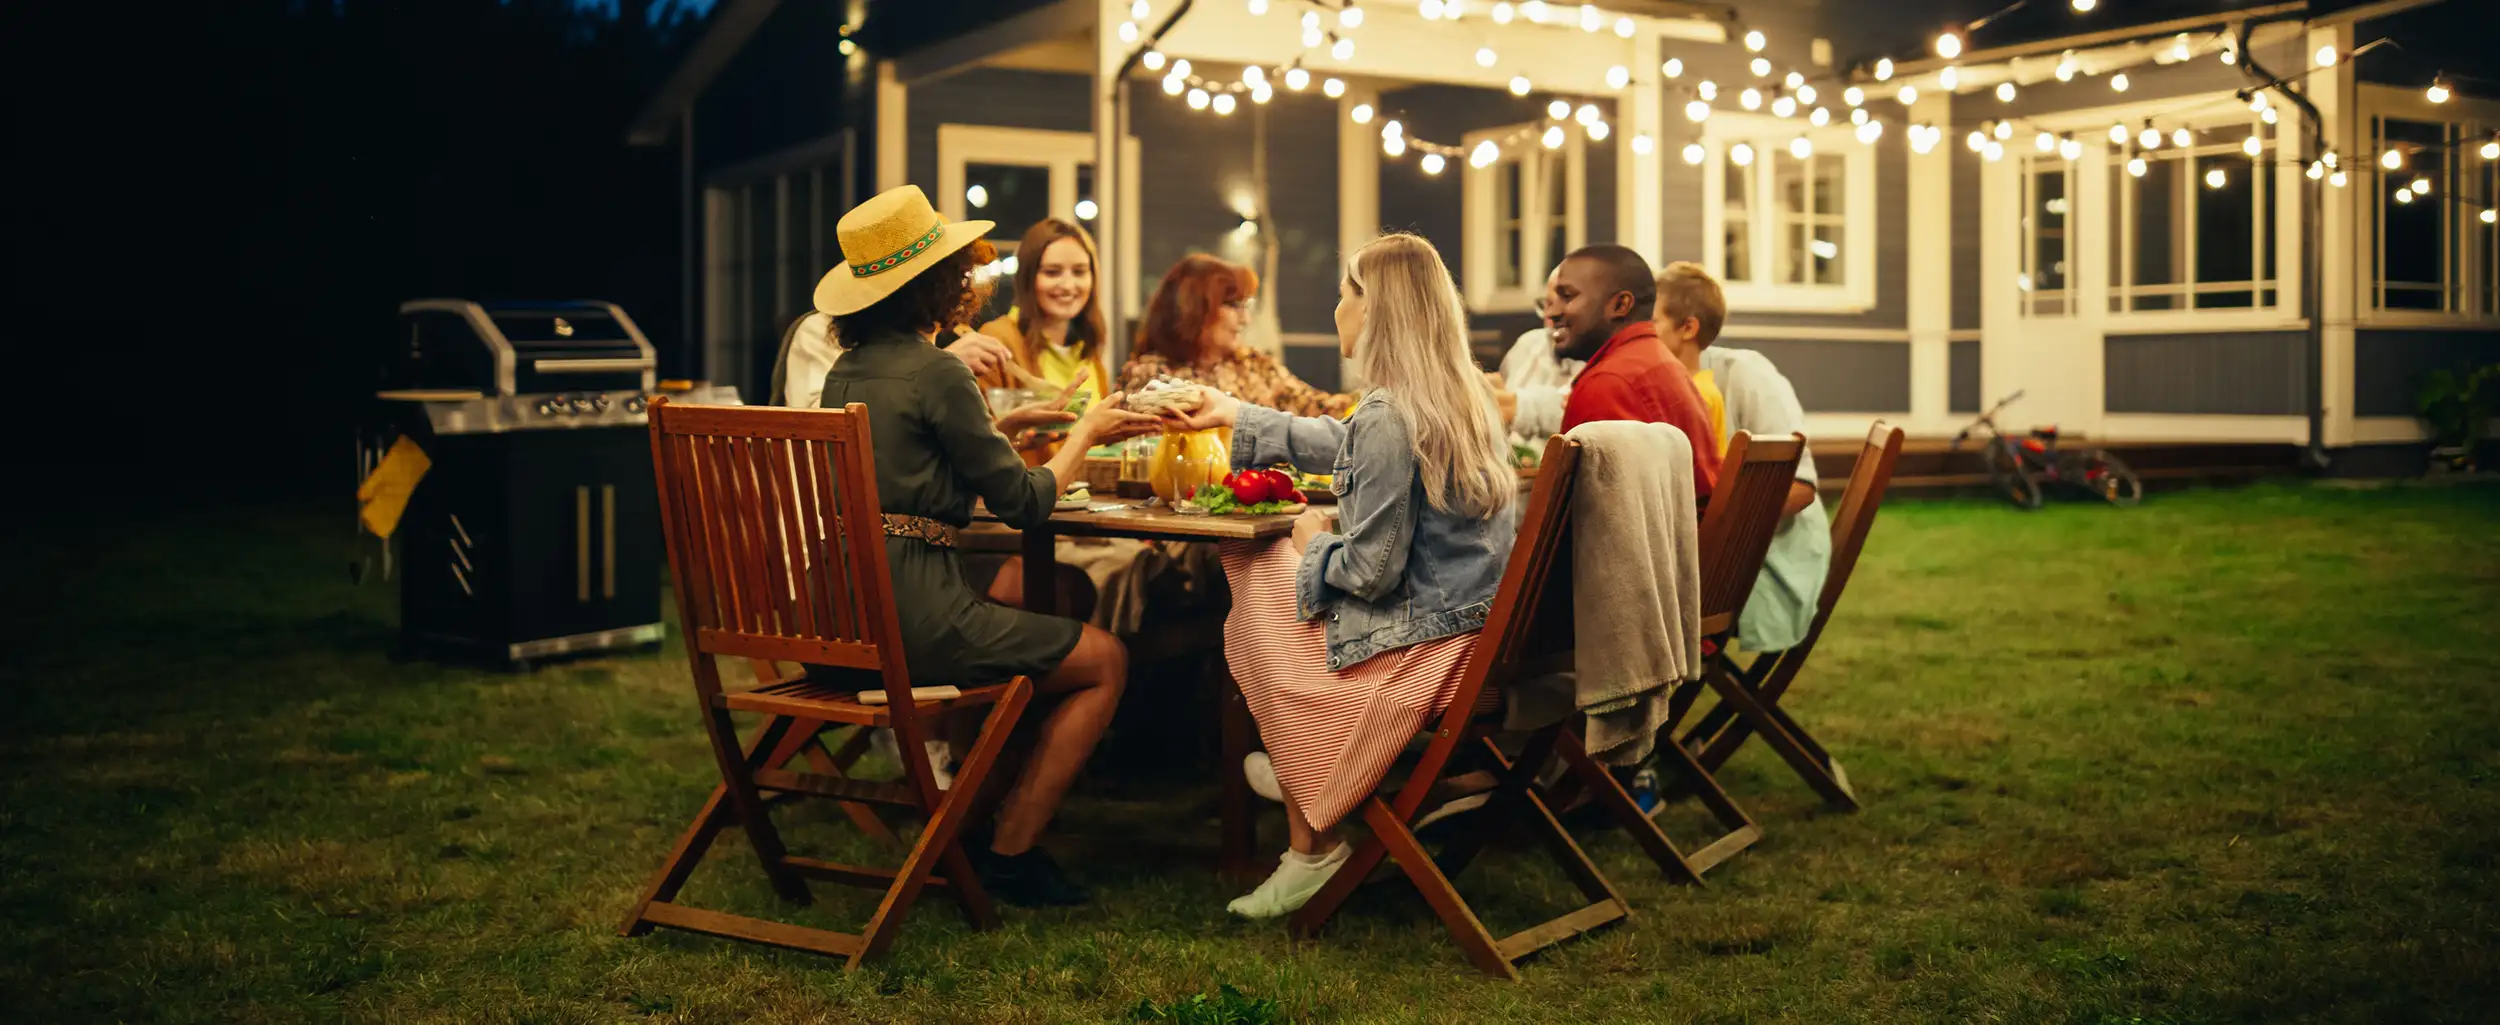 Family and Multicultural Friends Celebrating Outside at Home in the Evening. Group of Children, Adults and Old People Gathered at a Table, Having Fun Conversations. Eating Barbecue and Vegetables.